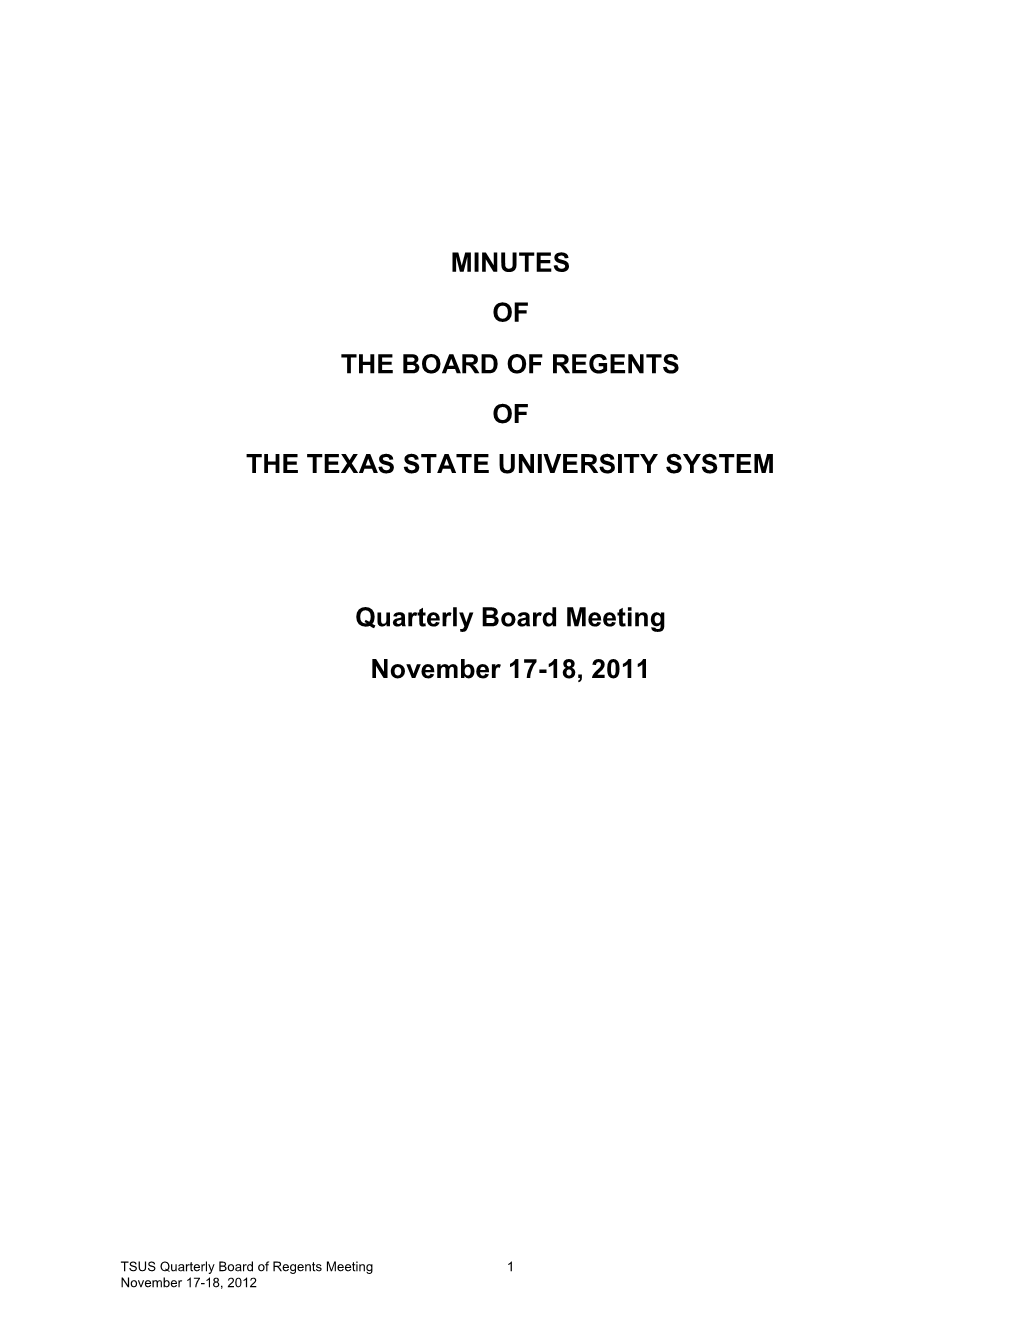 Minutes of the Board of Regents of the Texas State